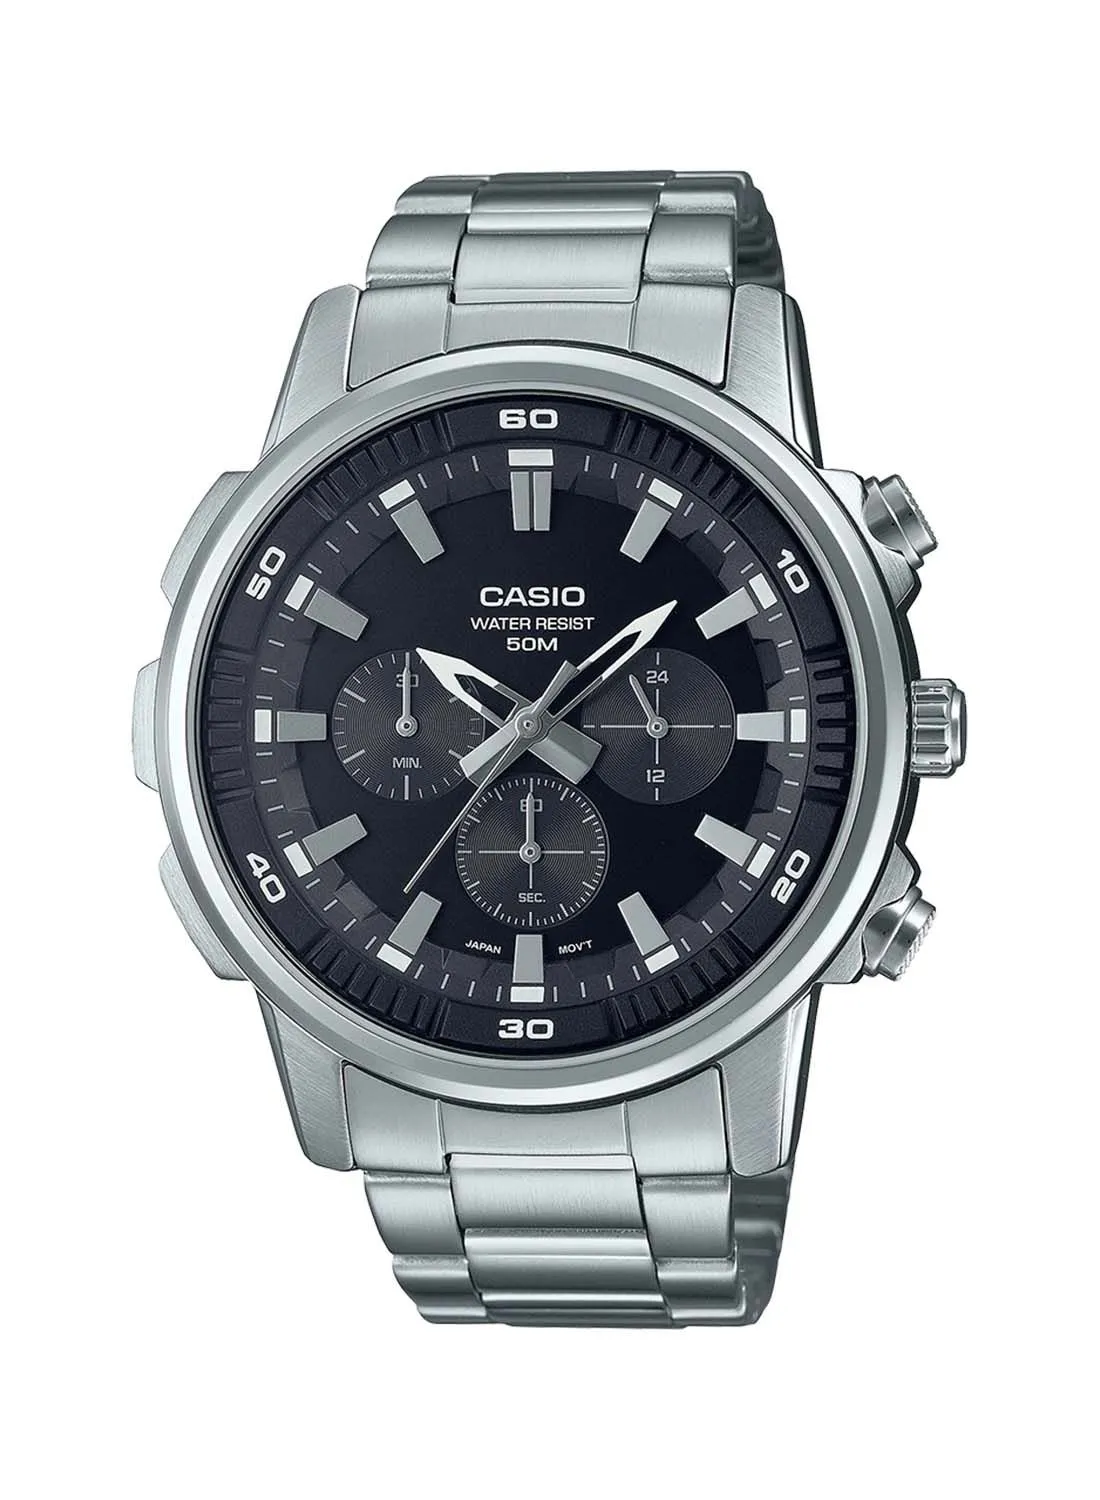 CASIO Analog Round Waterproof Wrist Watch With Stainless Steel MTP-E505D-1AVDF